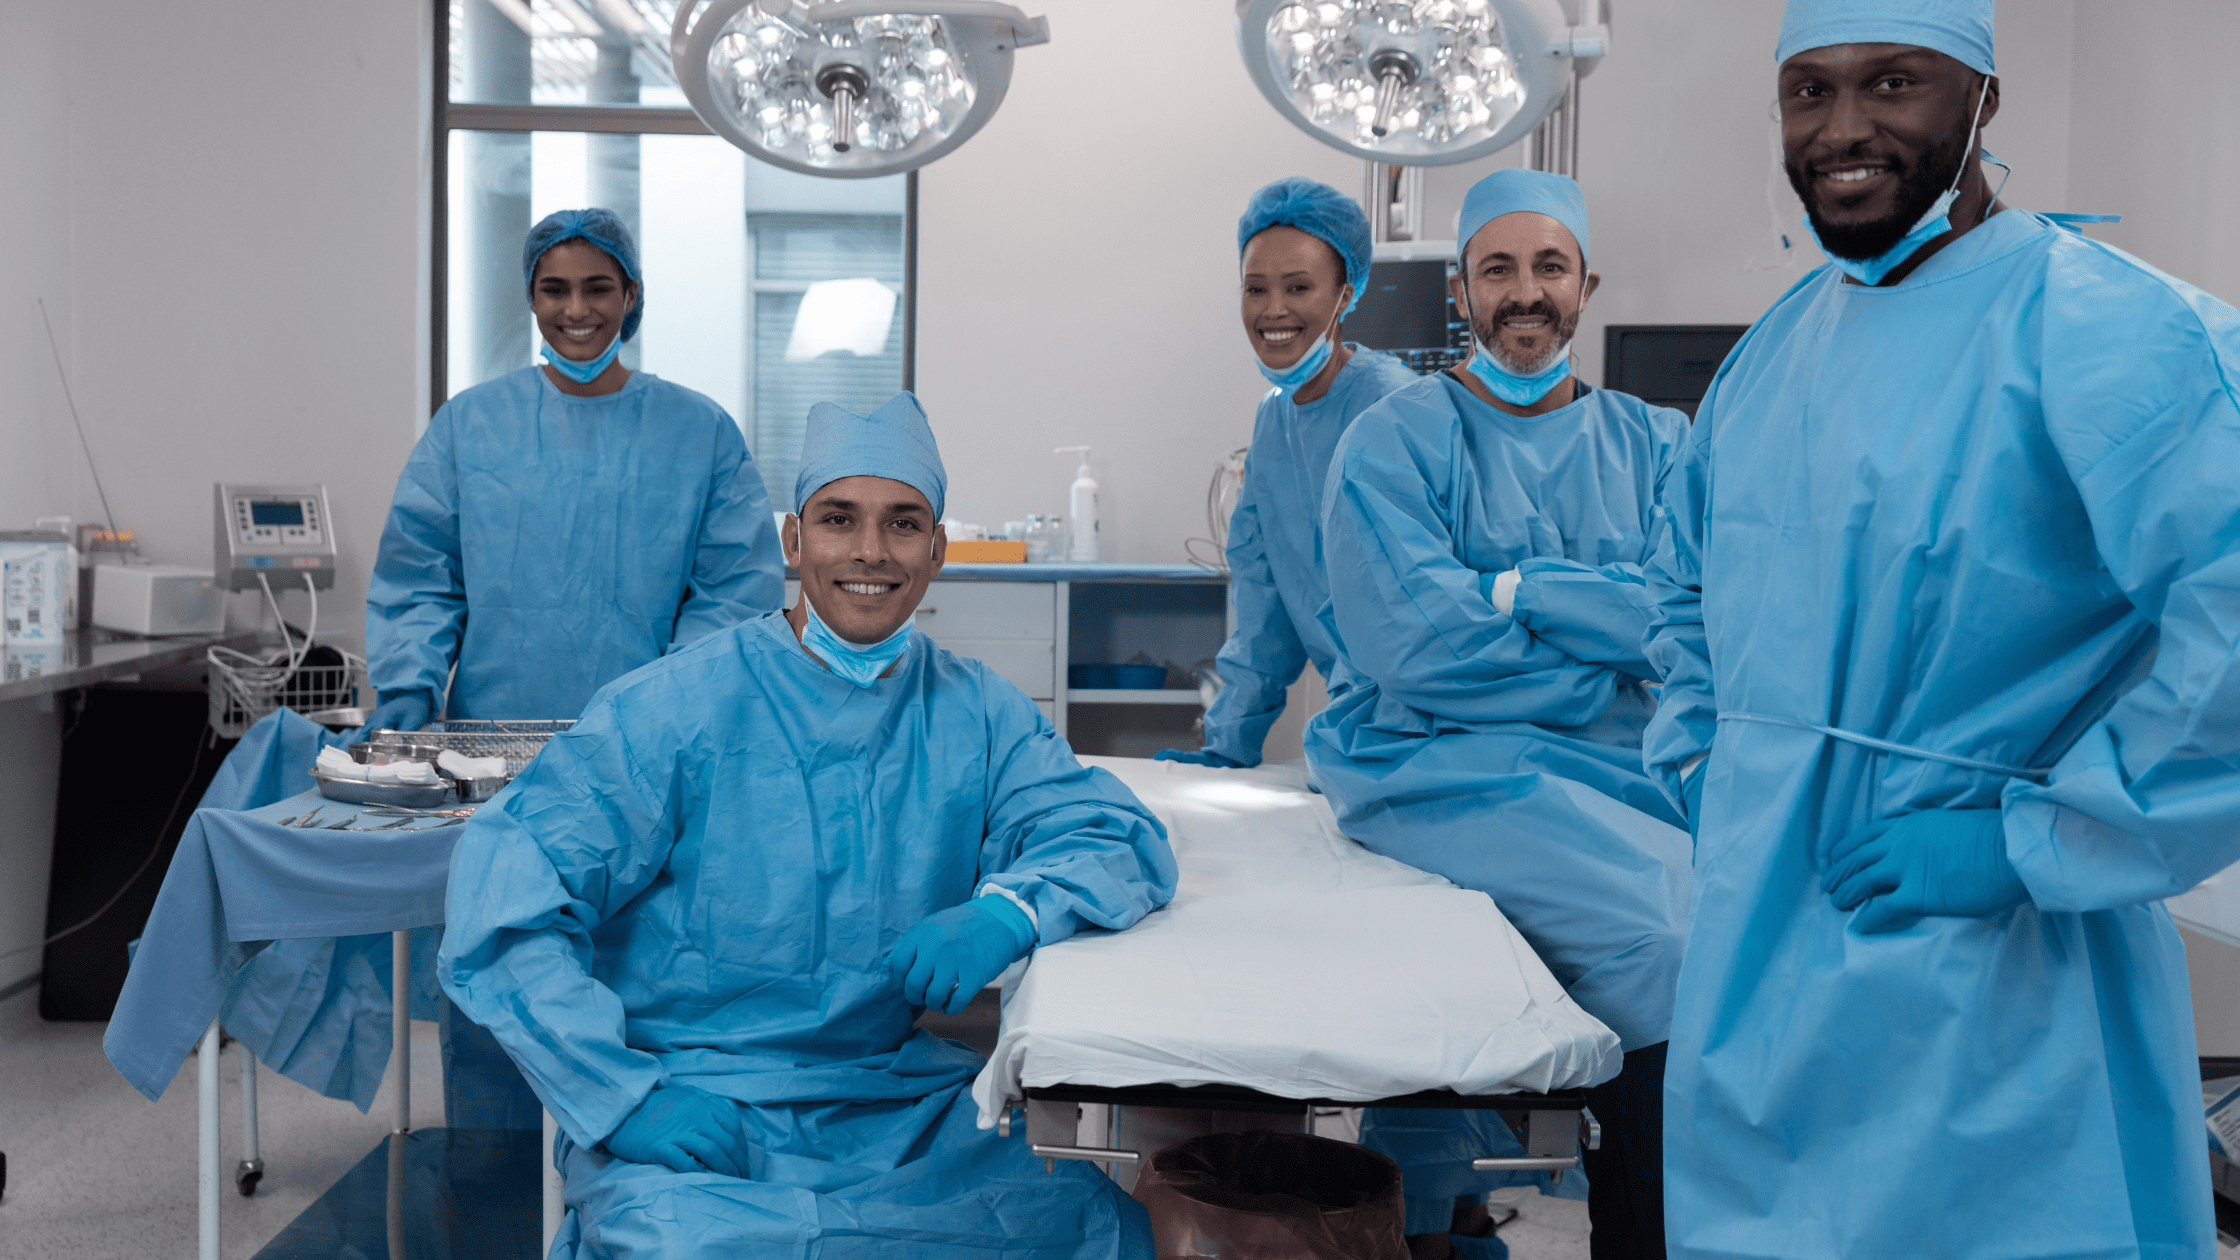 A group of surgeons prepared for surgery.